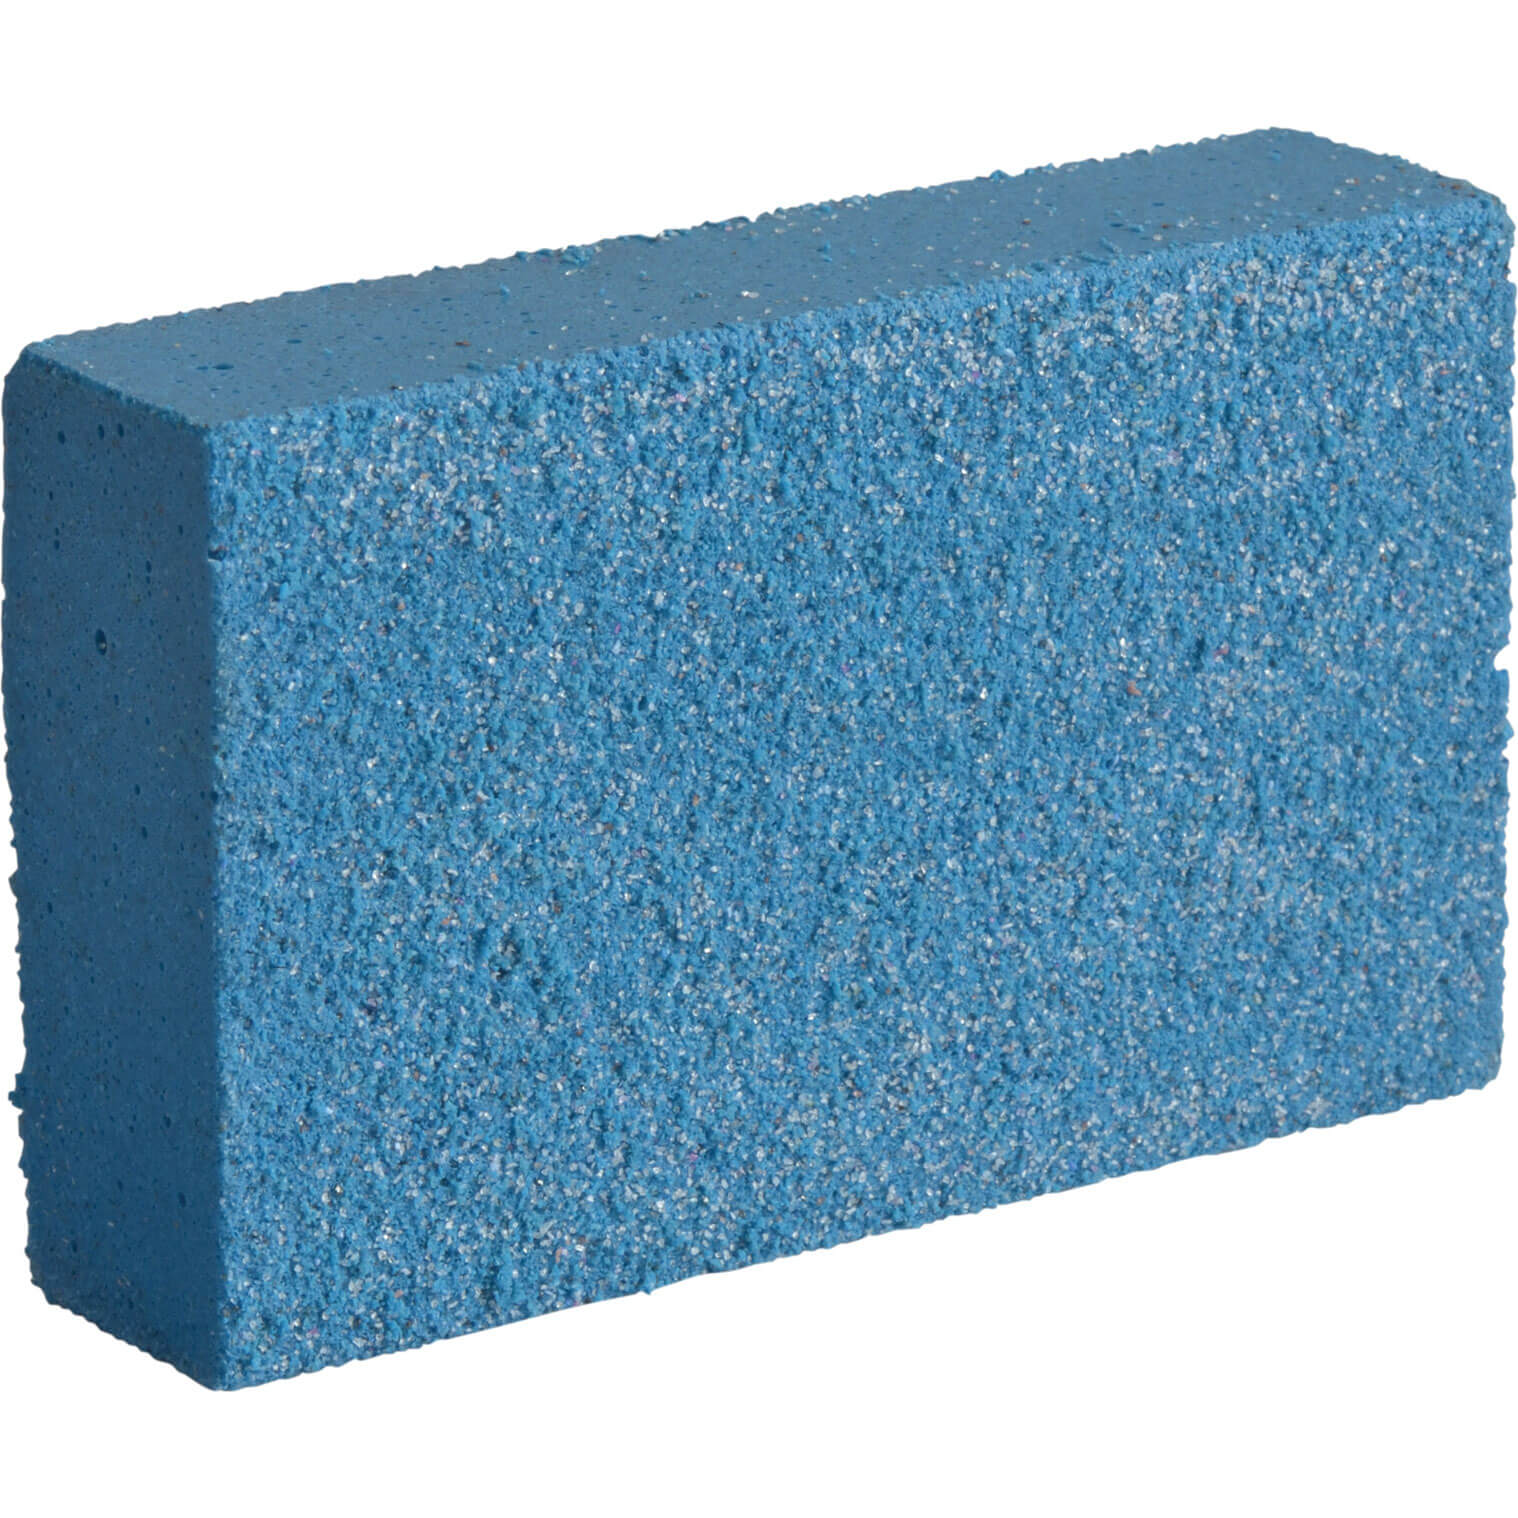 Click to view product details and reviews for Garryson Garryflex Abrasive Block Coarse.